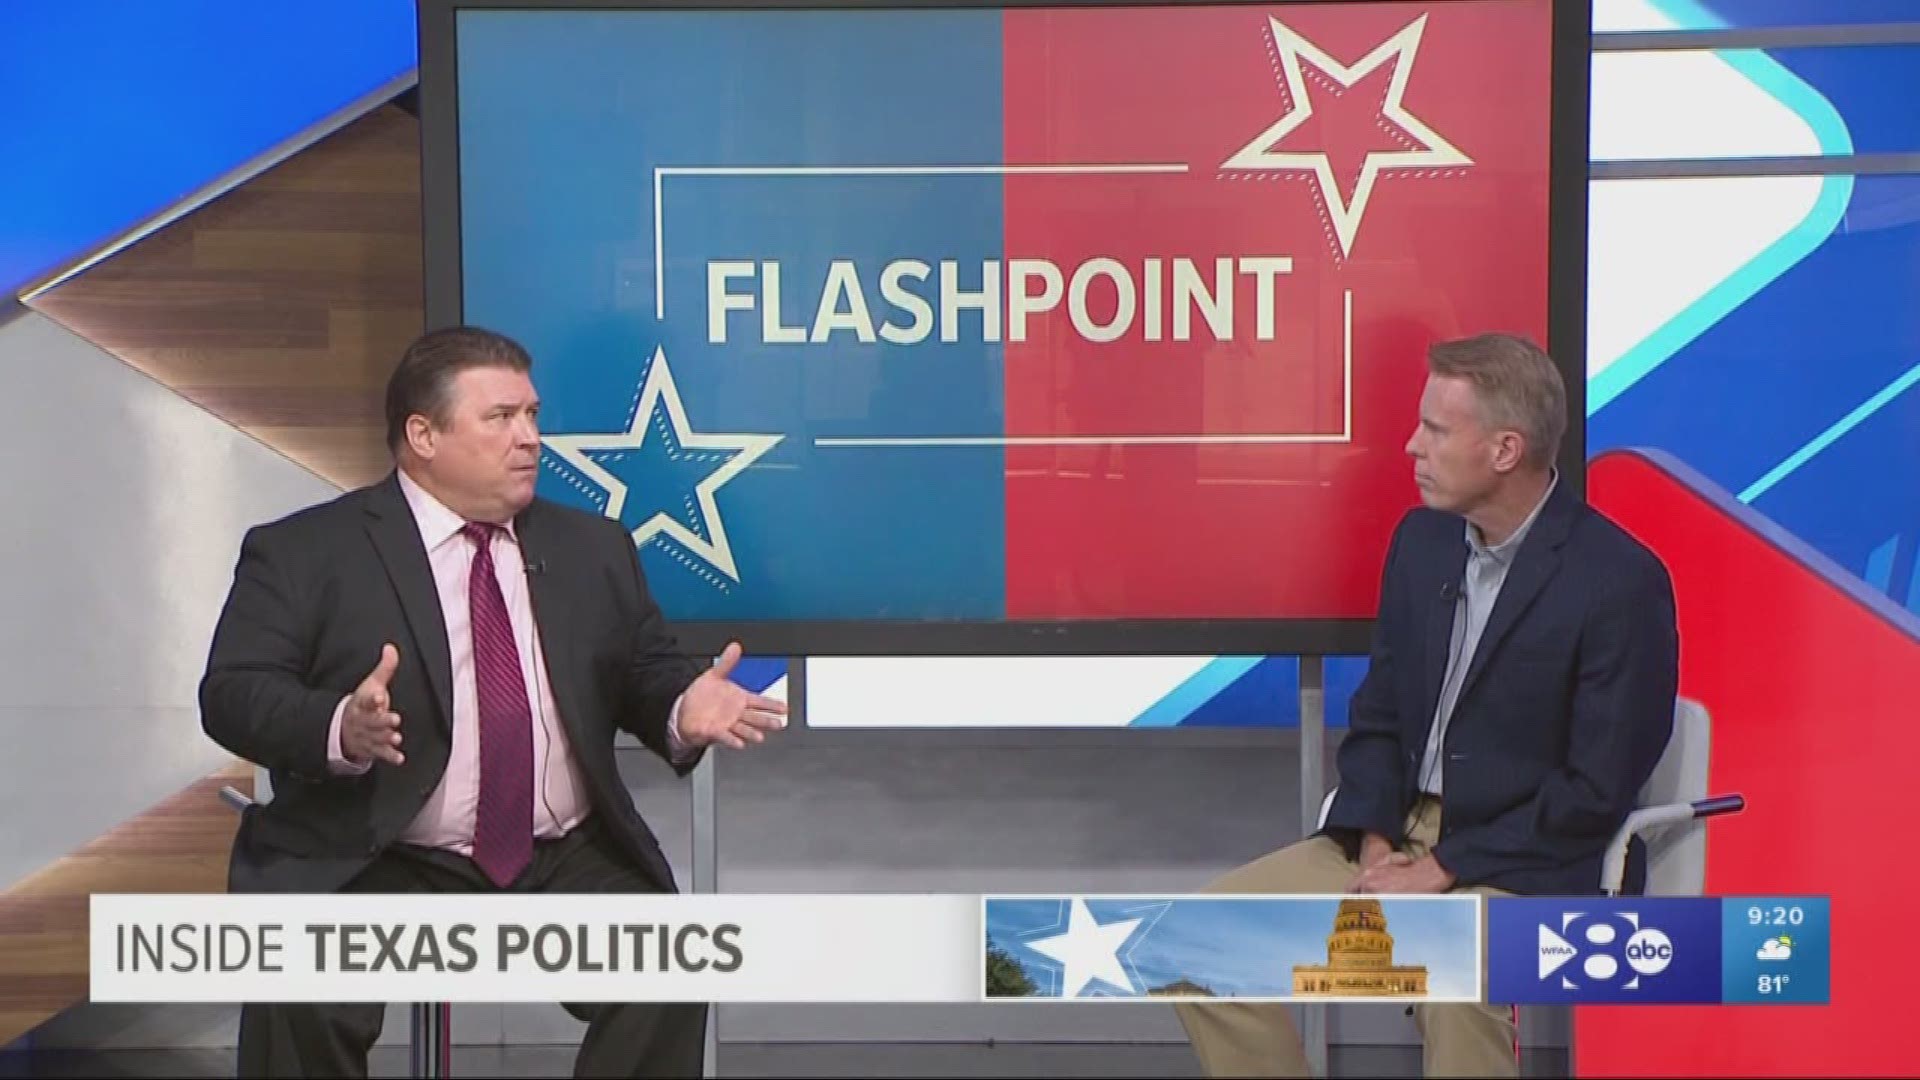 President Trump got a big win from the U.S. Supreme Court last week. Justices ruled that Trump can deny asylum to migrants that came through another country first before entering the U.S. It sparked this week’s Flashpoint. From the right, Wade Emmert, former chairman of Dallas County's Republican Party. And from the left, Rich Hancock from VirtualNewsCenter.com.